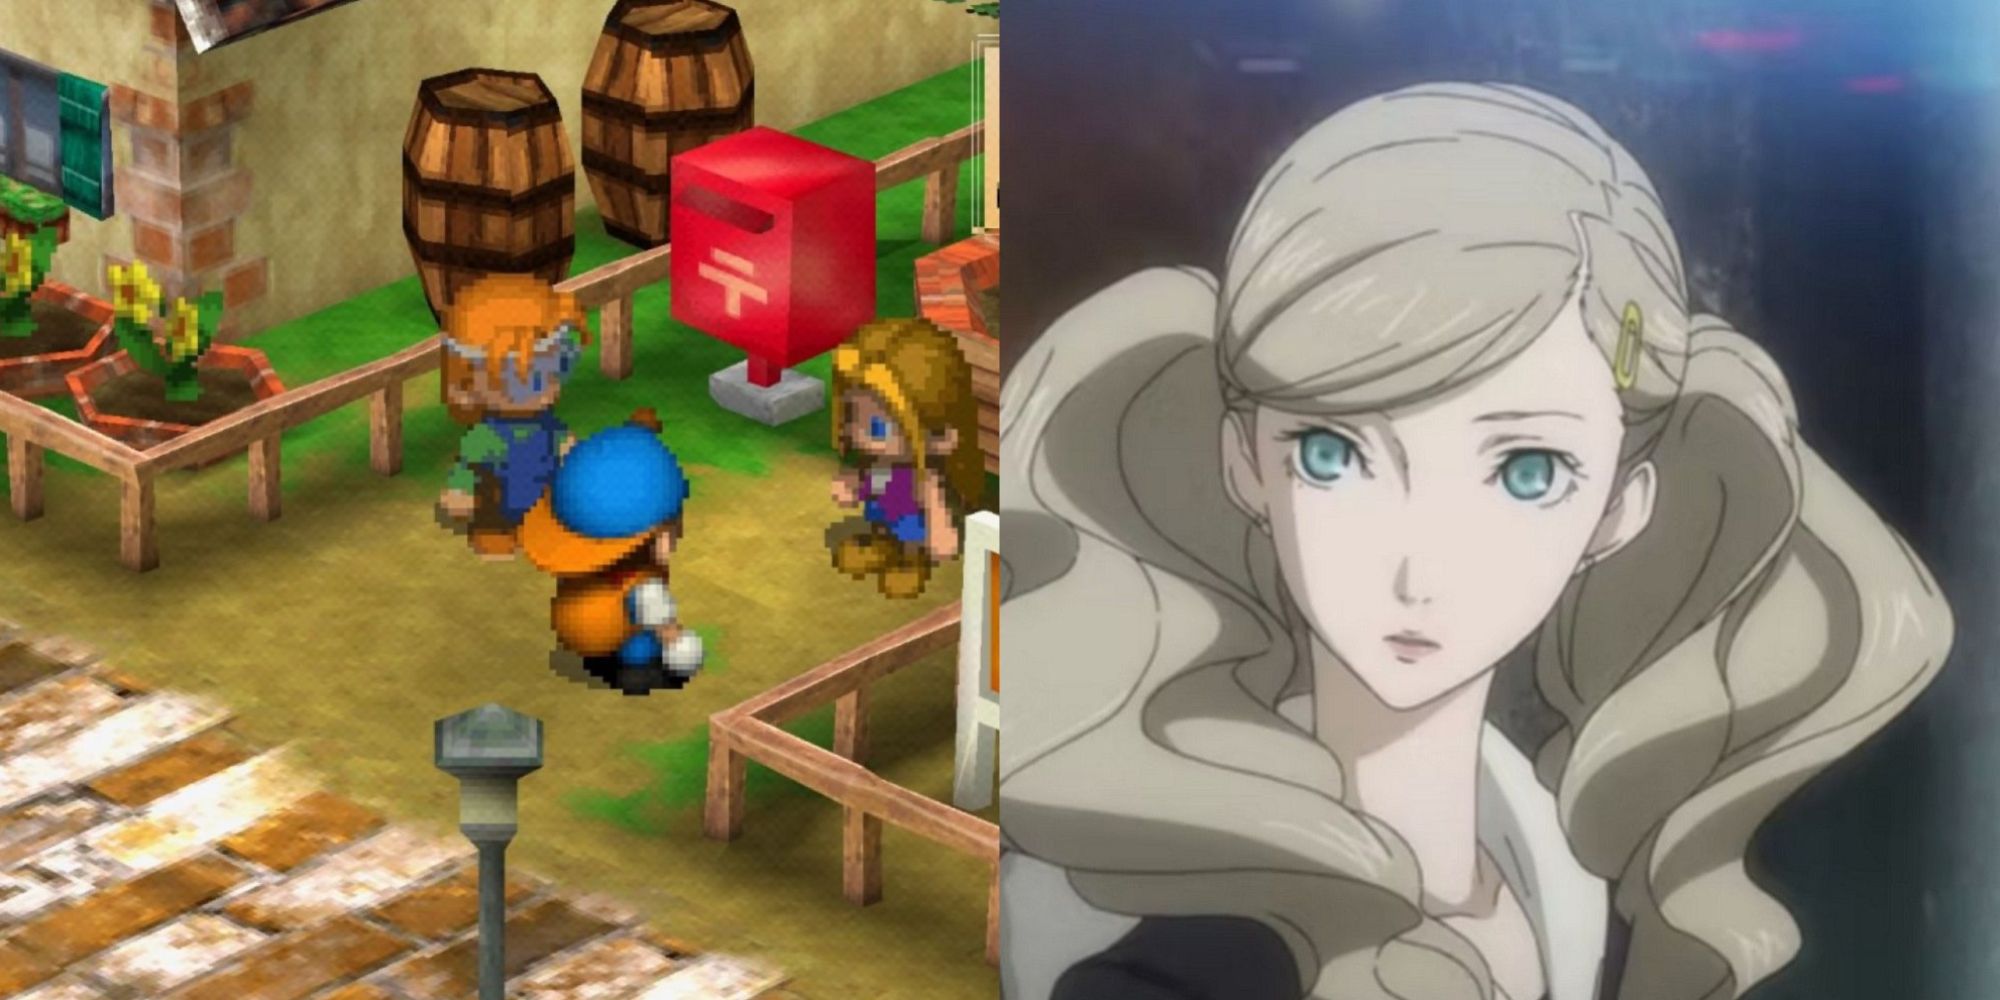 Longest Games Featured Split Image Of Harvest Moon And Persona 5